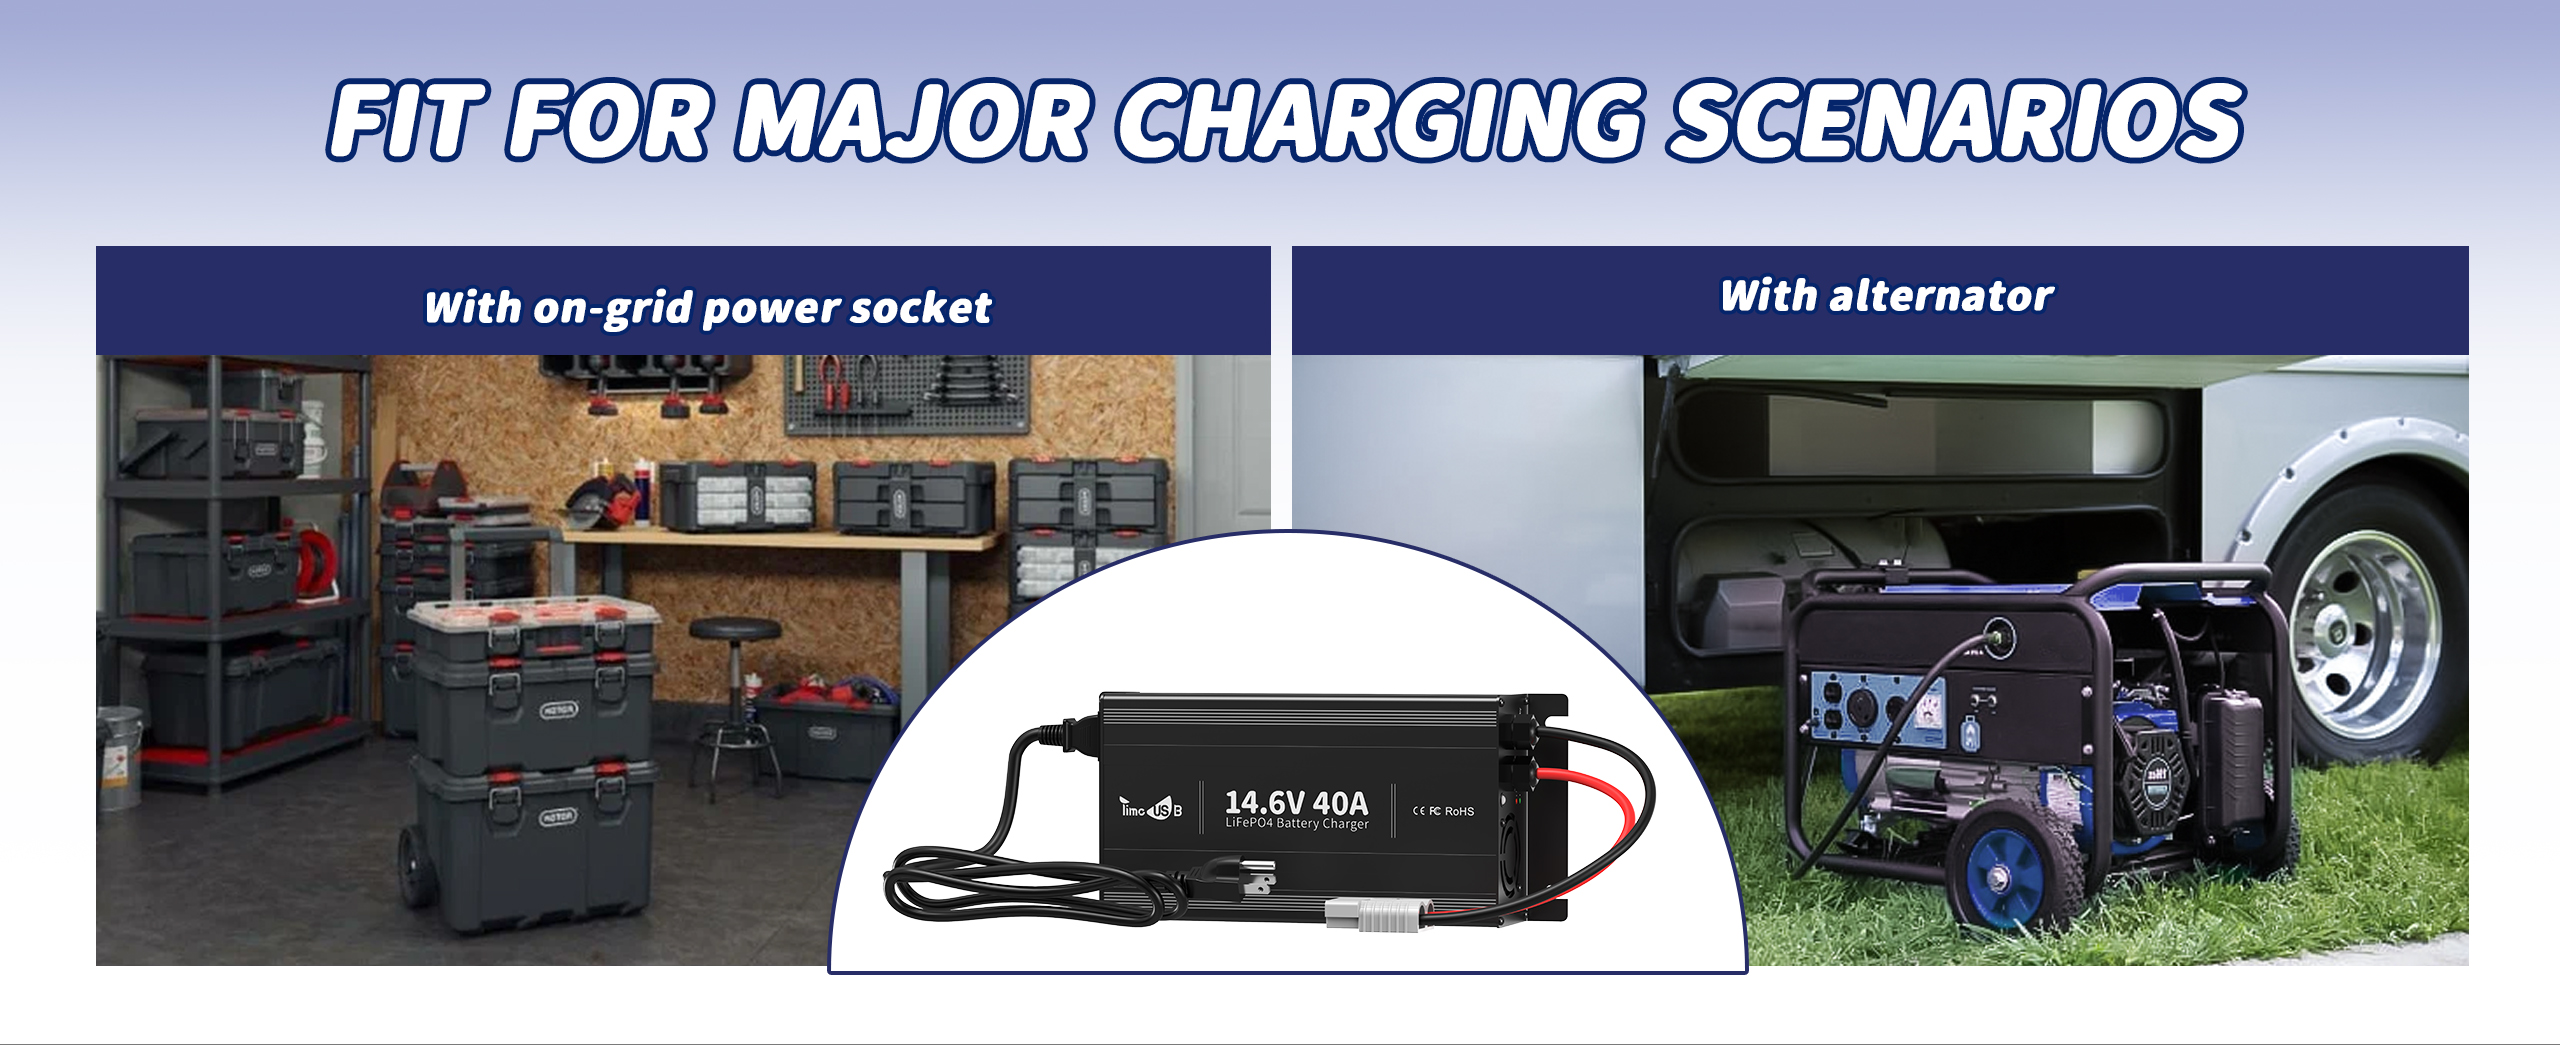 Fit for major charging scenarios with rv battery charger